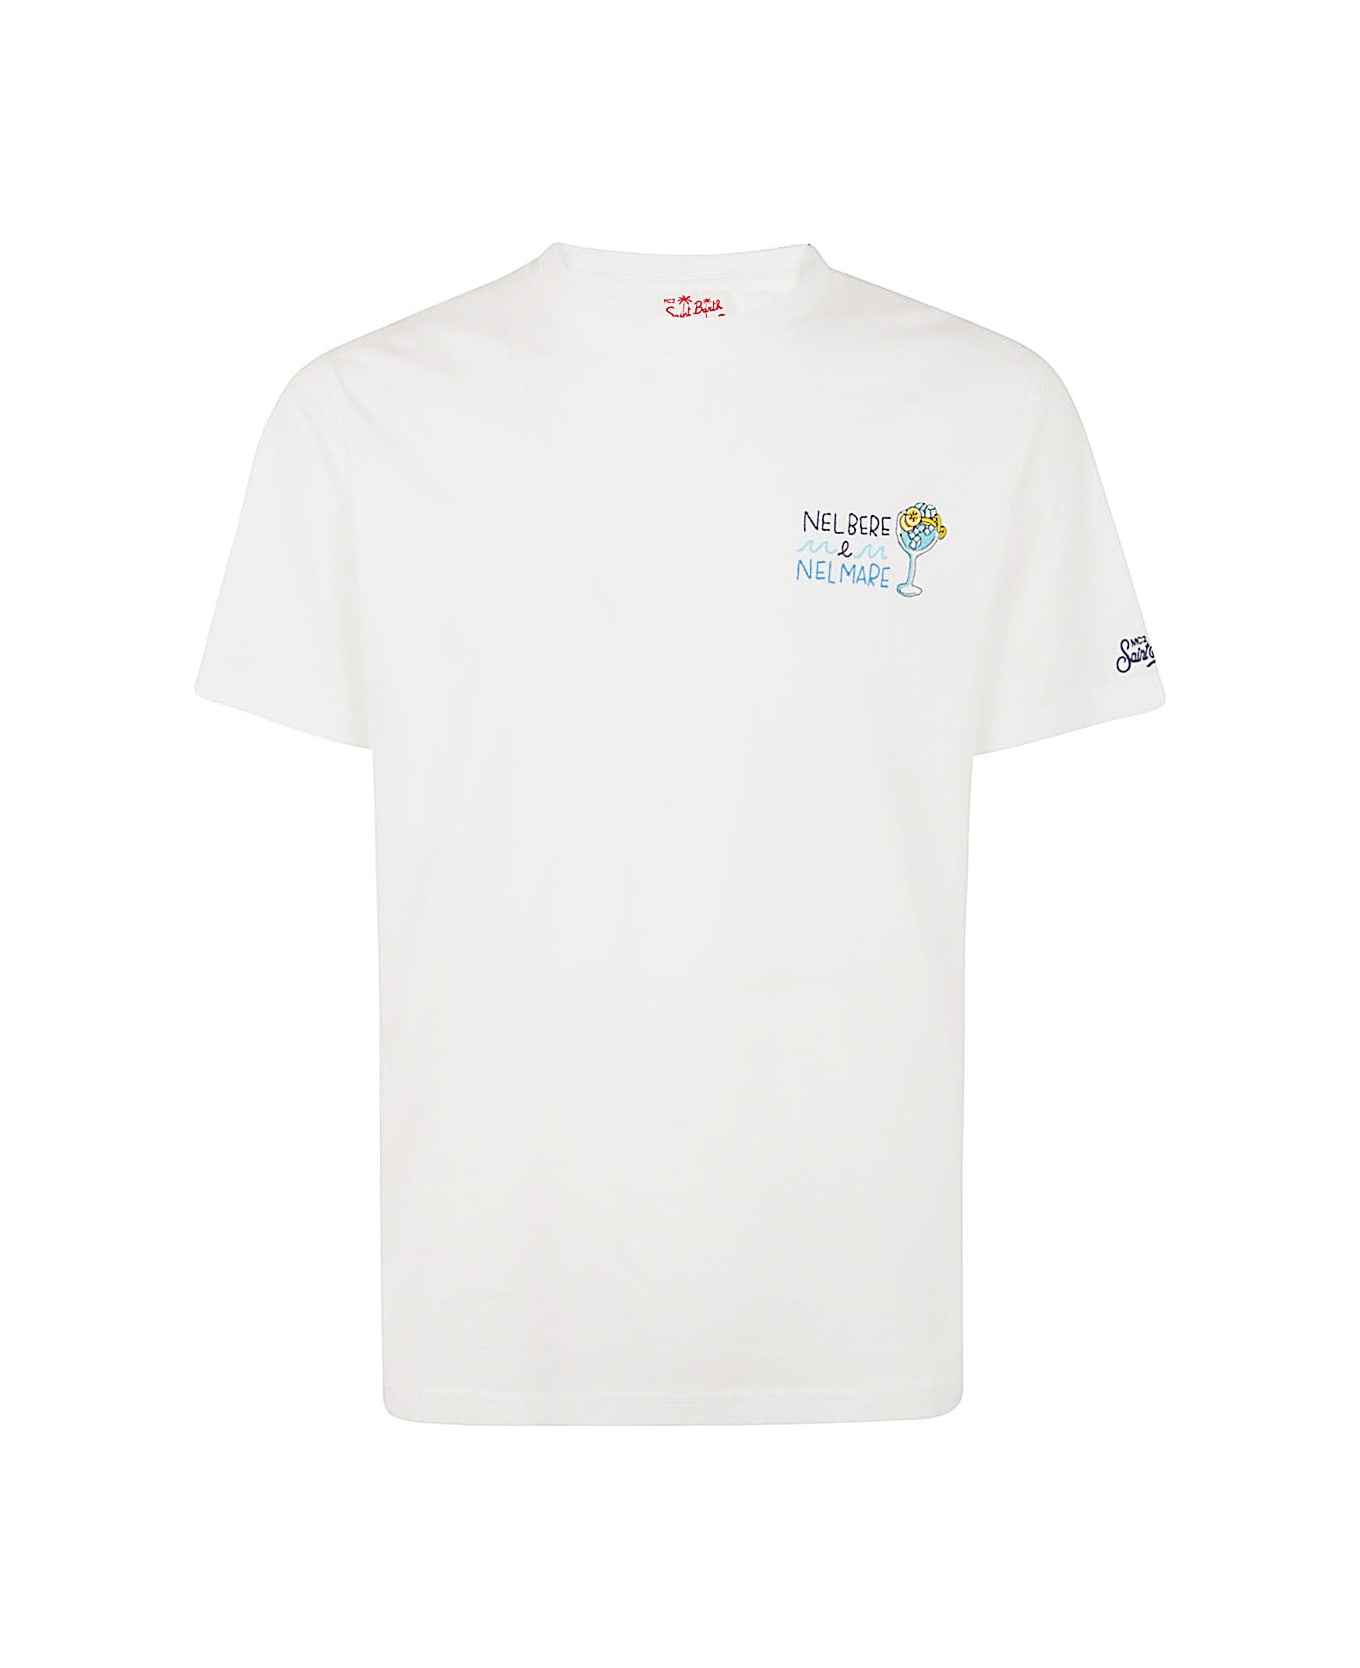 MC2 Saint Barth T-shirt With Embroidery - N Bere Mare Emb